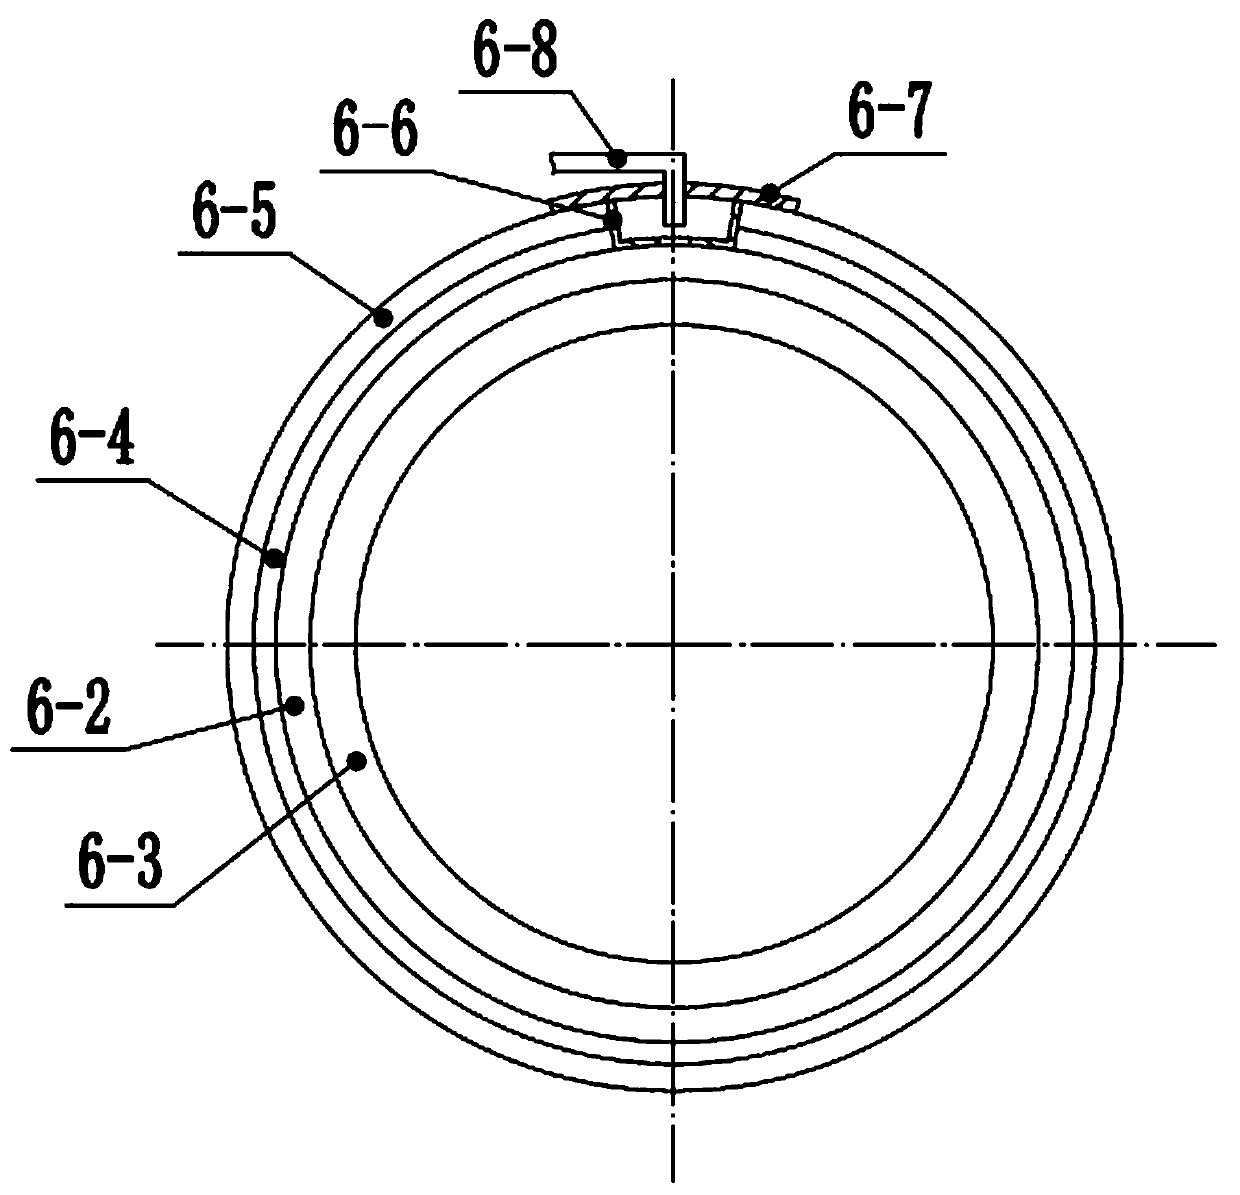 Integrated rotation seal system